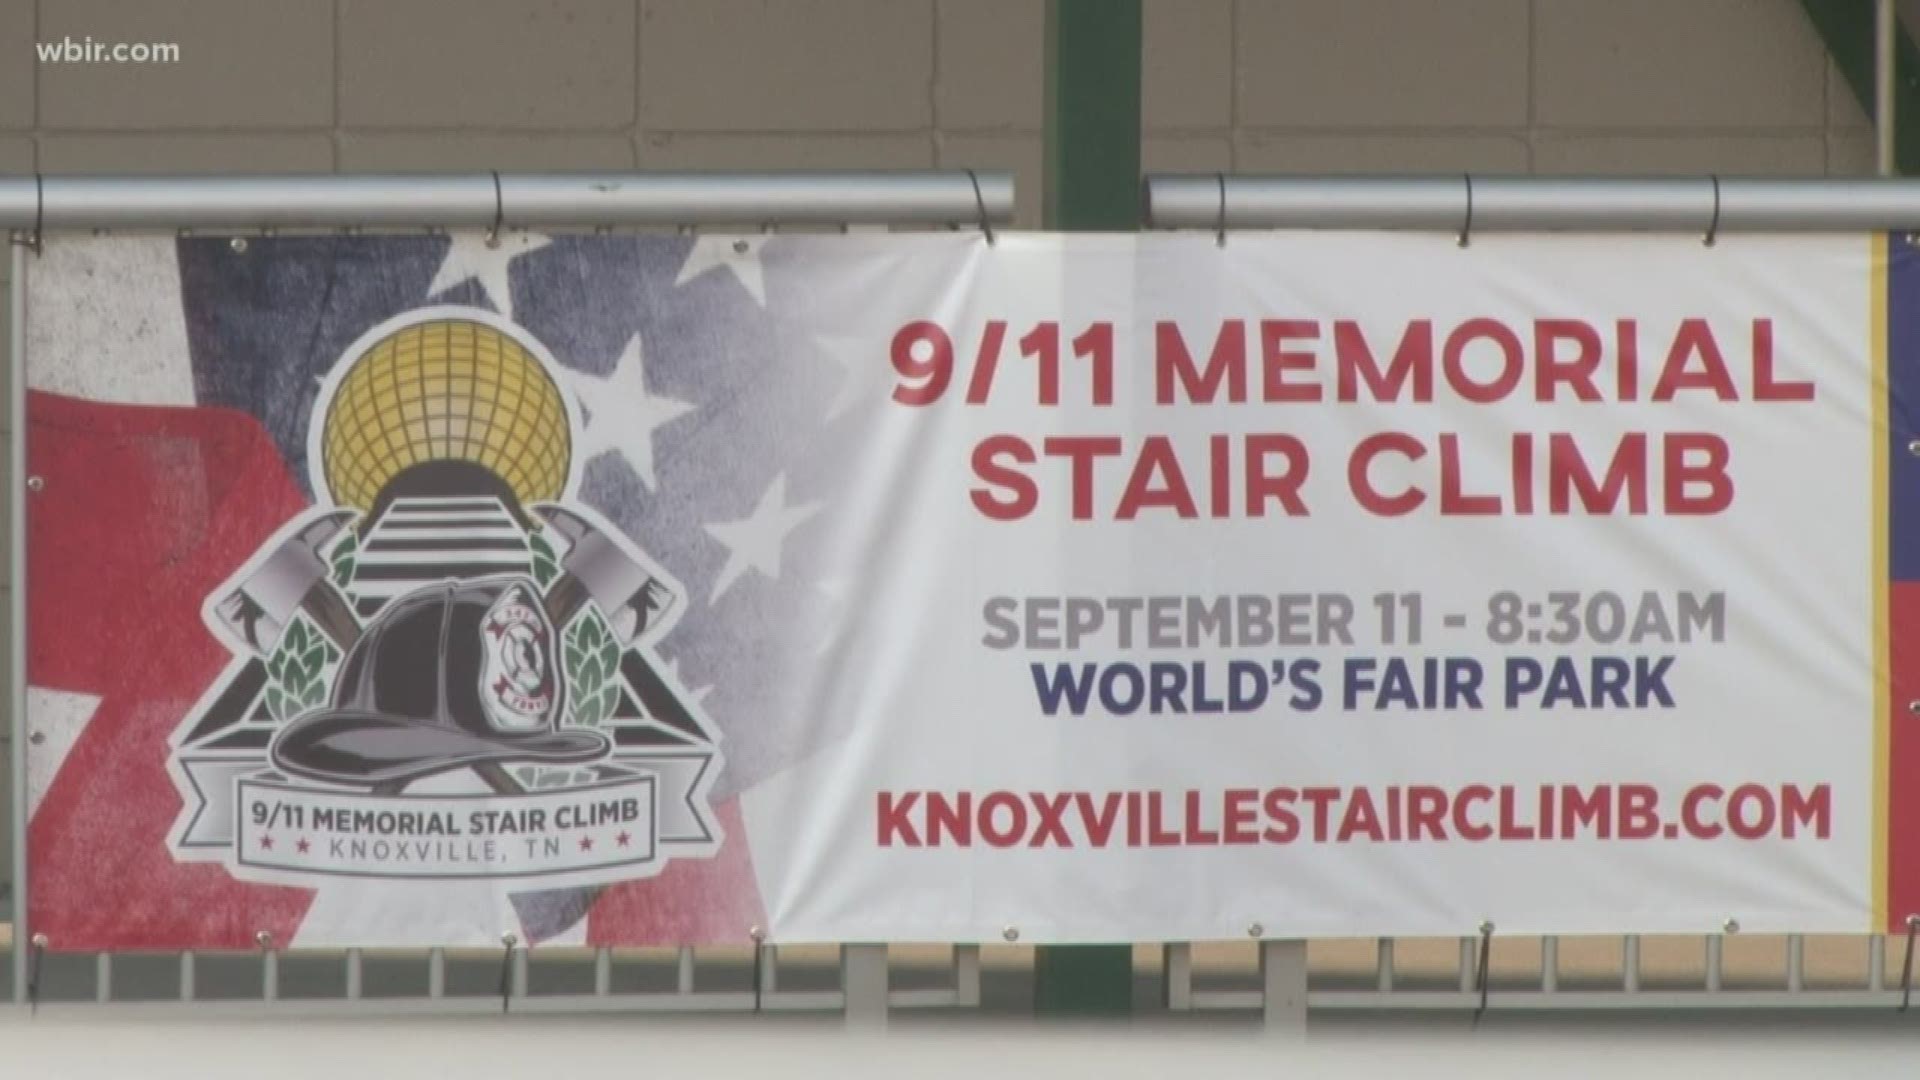 Wednesday morning more than 200 volunteers climbed the stairs of the Sunsphere in memory of the sacrifices first responders made at the World Trade Center.